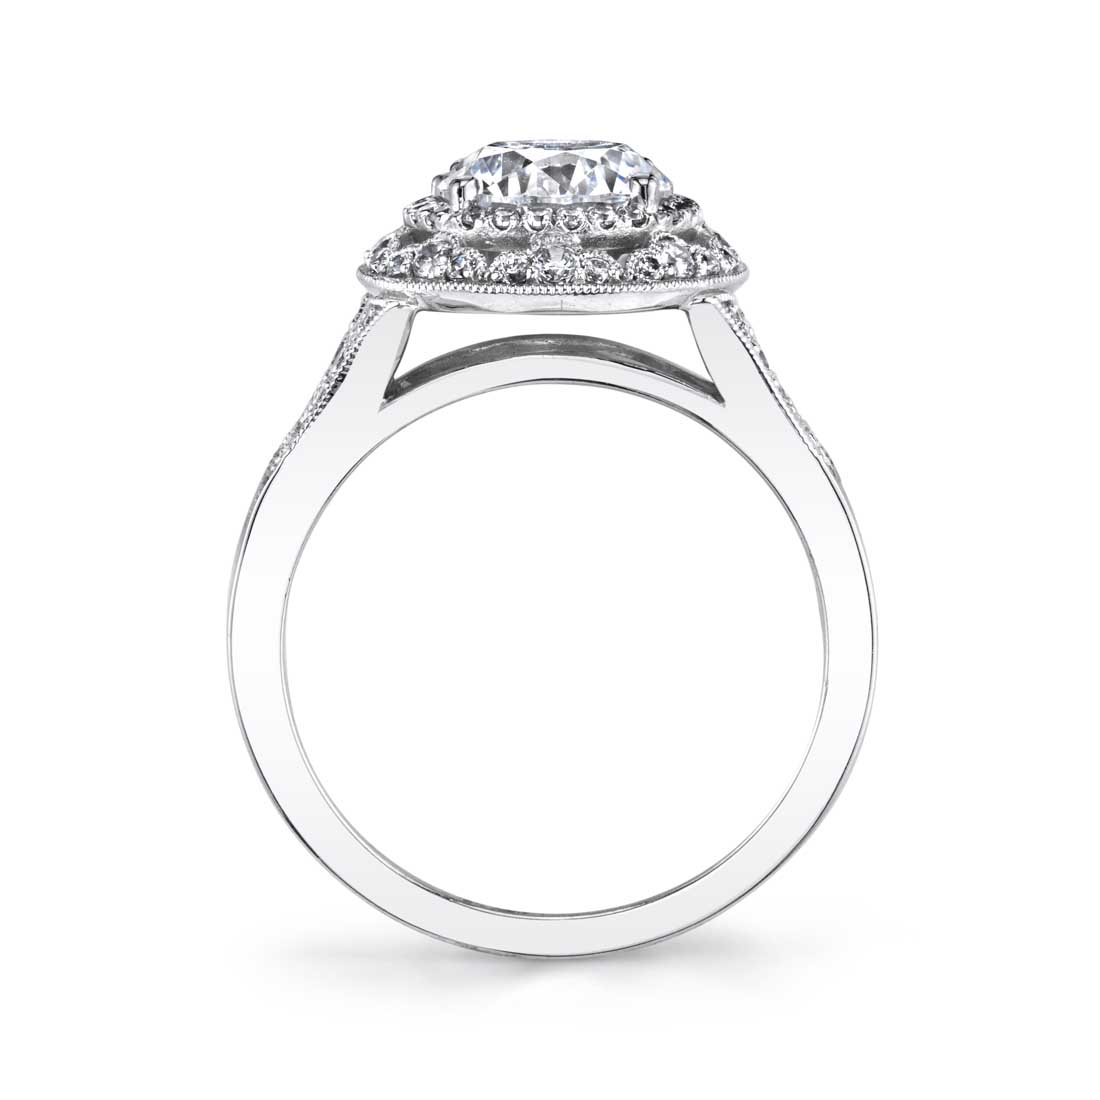 Profile Image of a Vintage Inspired Double Halo Engagement Ring